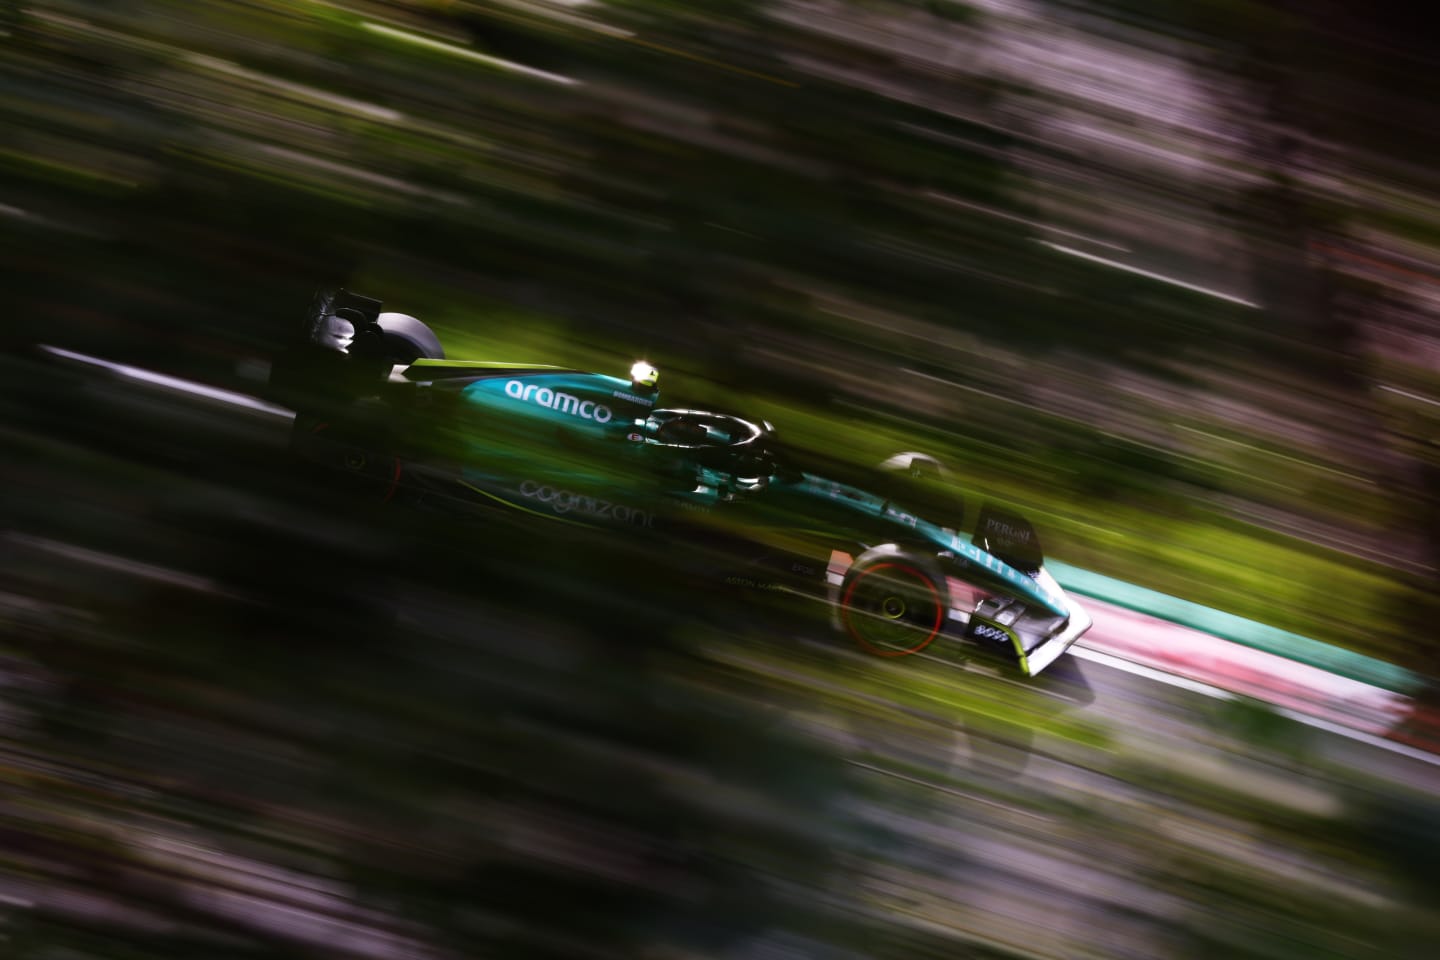 SUZUKA, JAPAN - OCTOBER 08: Sebastian Vettel of Germany driving the (5) Aston Martin AMR22 Mercedes on track during qualifying ahead of the F1 Grand Prix of Japan at Suzuka International Racing Course on October 08, 2022 in Suzuka, Japan. (Photo by Clive Rose/Getty Images)